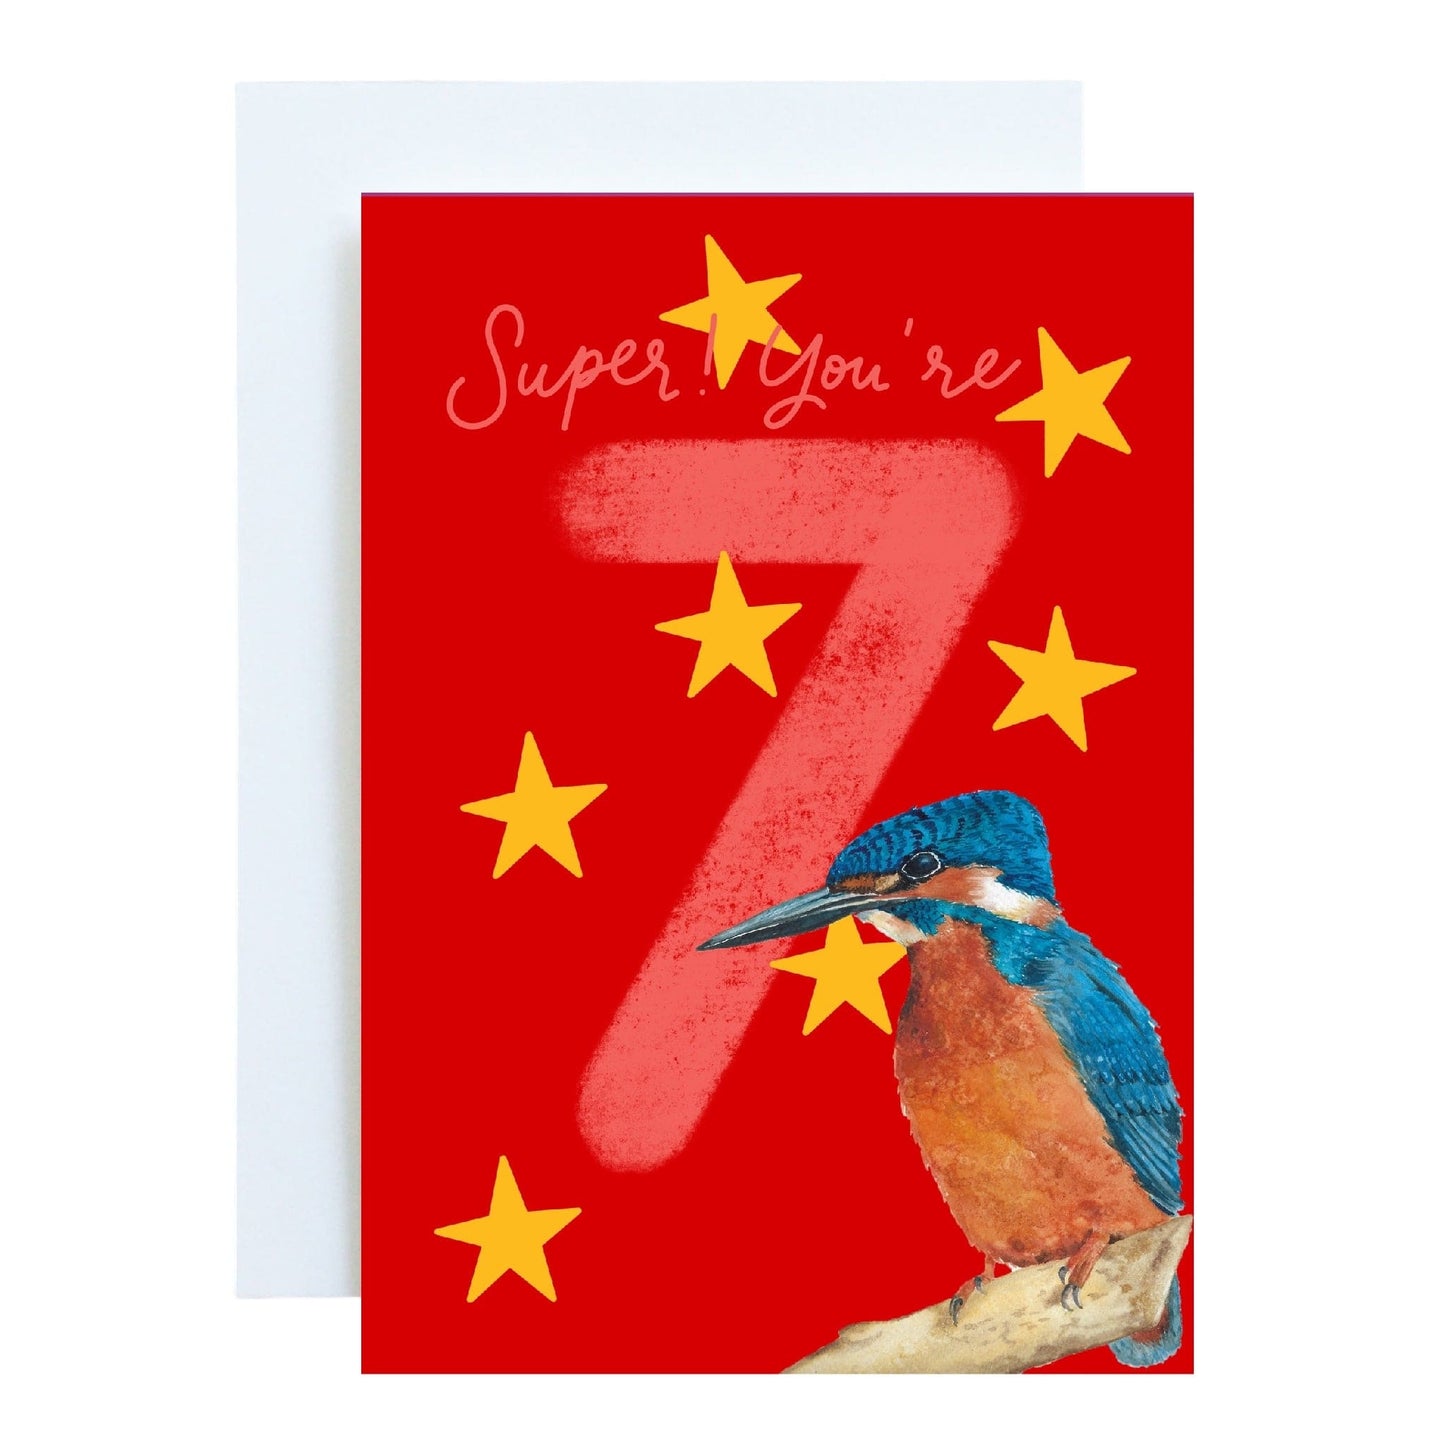 7 - Seventh birthday Card - Bright “Super! You’re 7” with kingfisher Cards And Hope Designs   